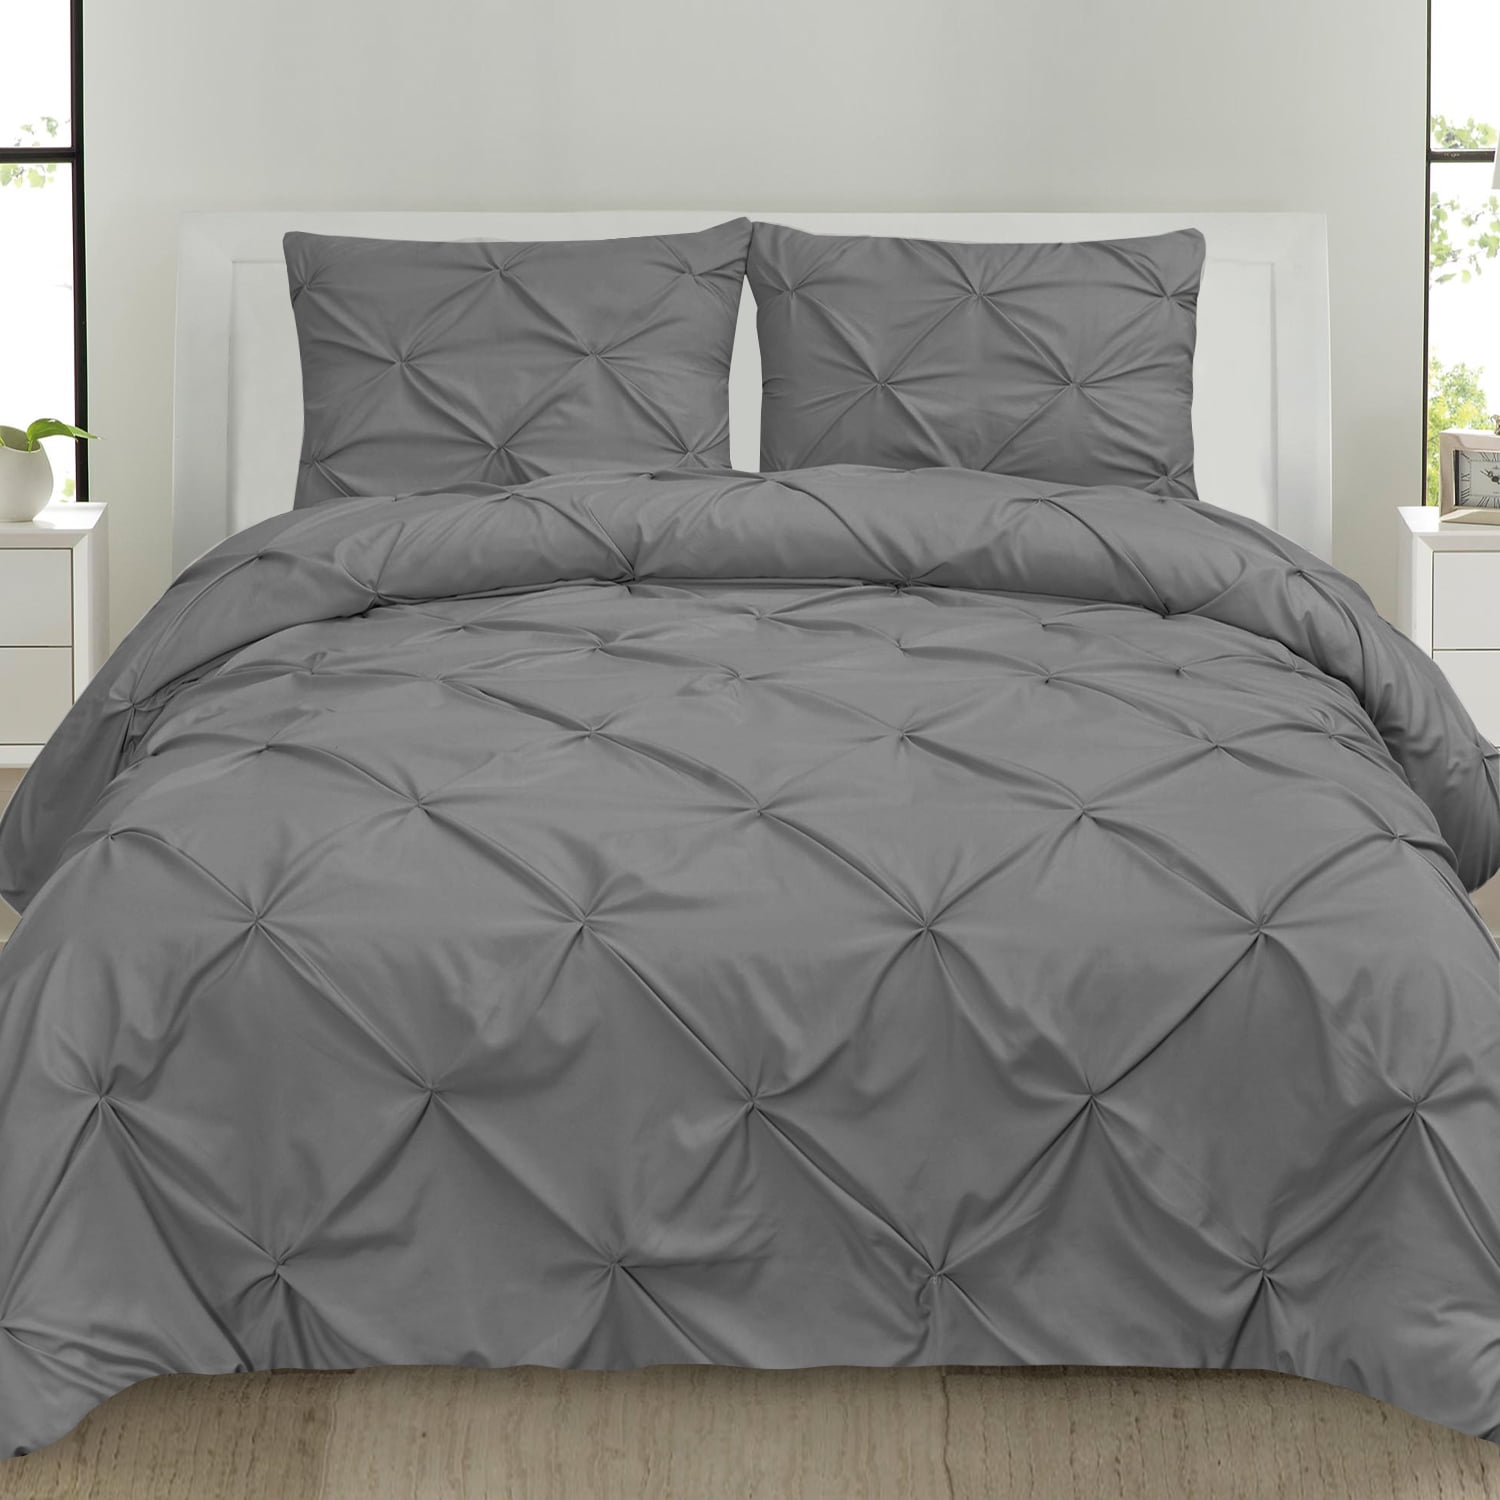 White Pintuck Pinch Pleat Pattern SMNJF 3 Piece Pinch Pleated Duvet Cover with Zipper Closure White, Queen